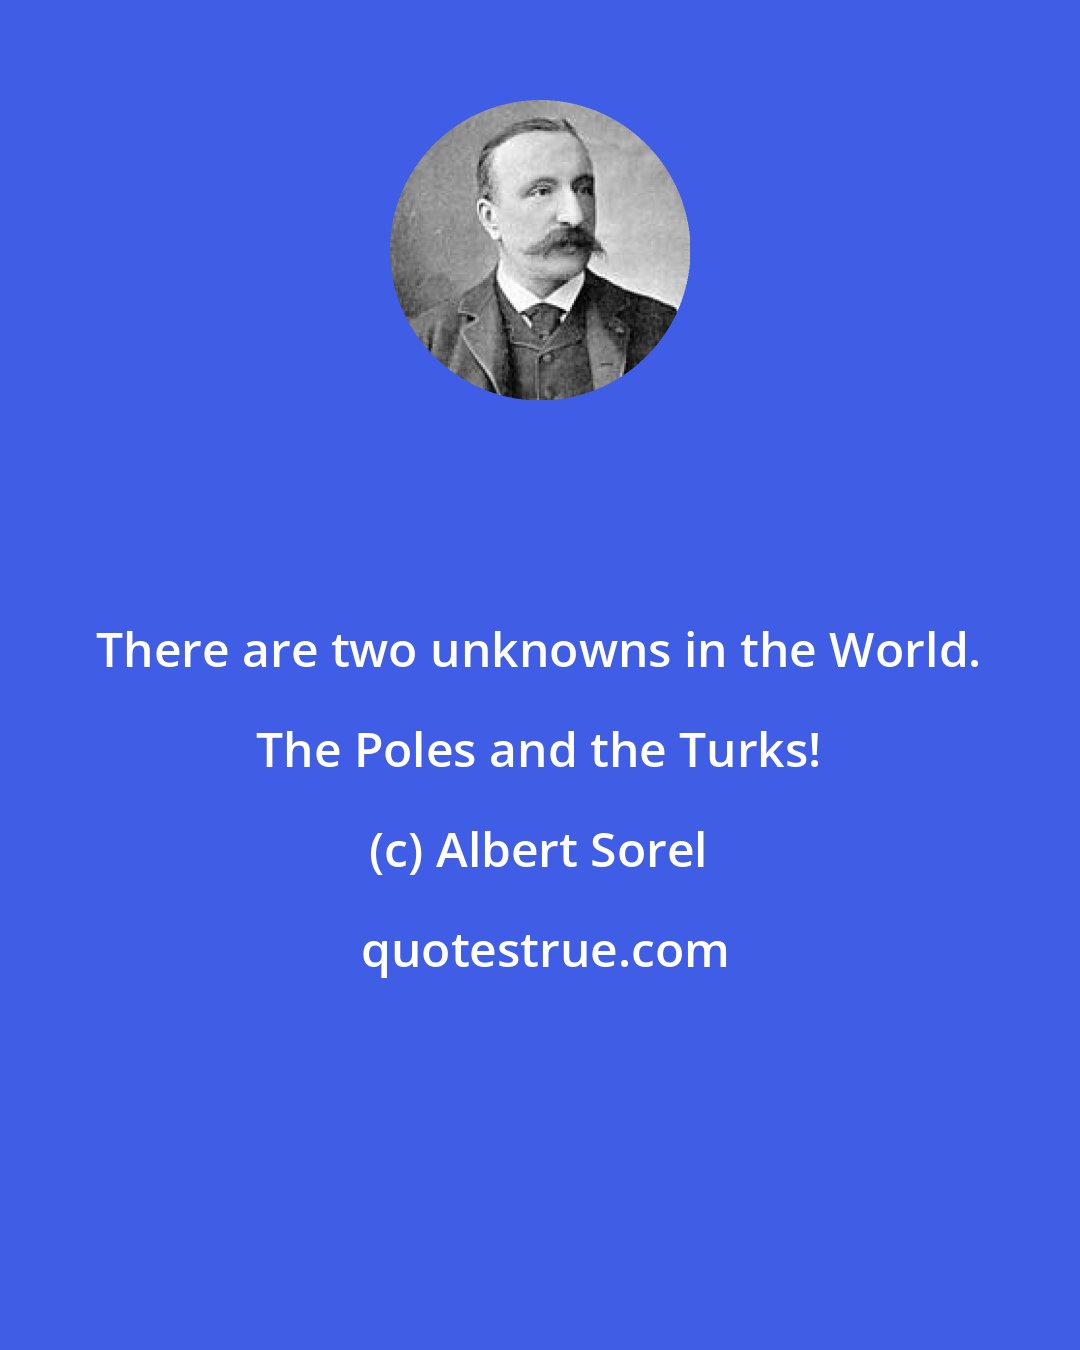 Albert Sorel: There are two unknowns in the World. The Poles and the Turks!